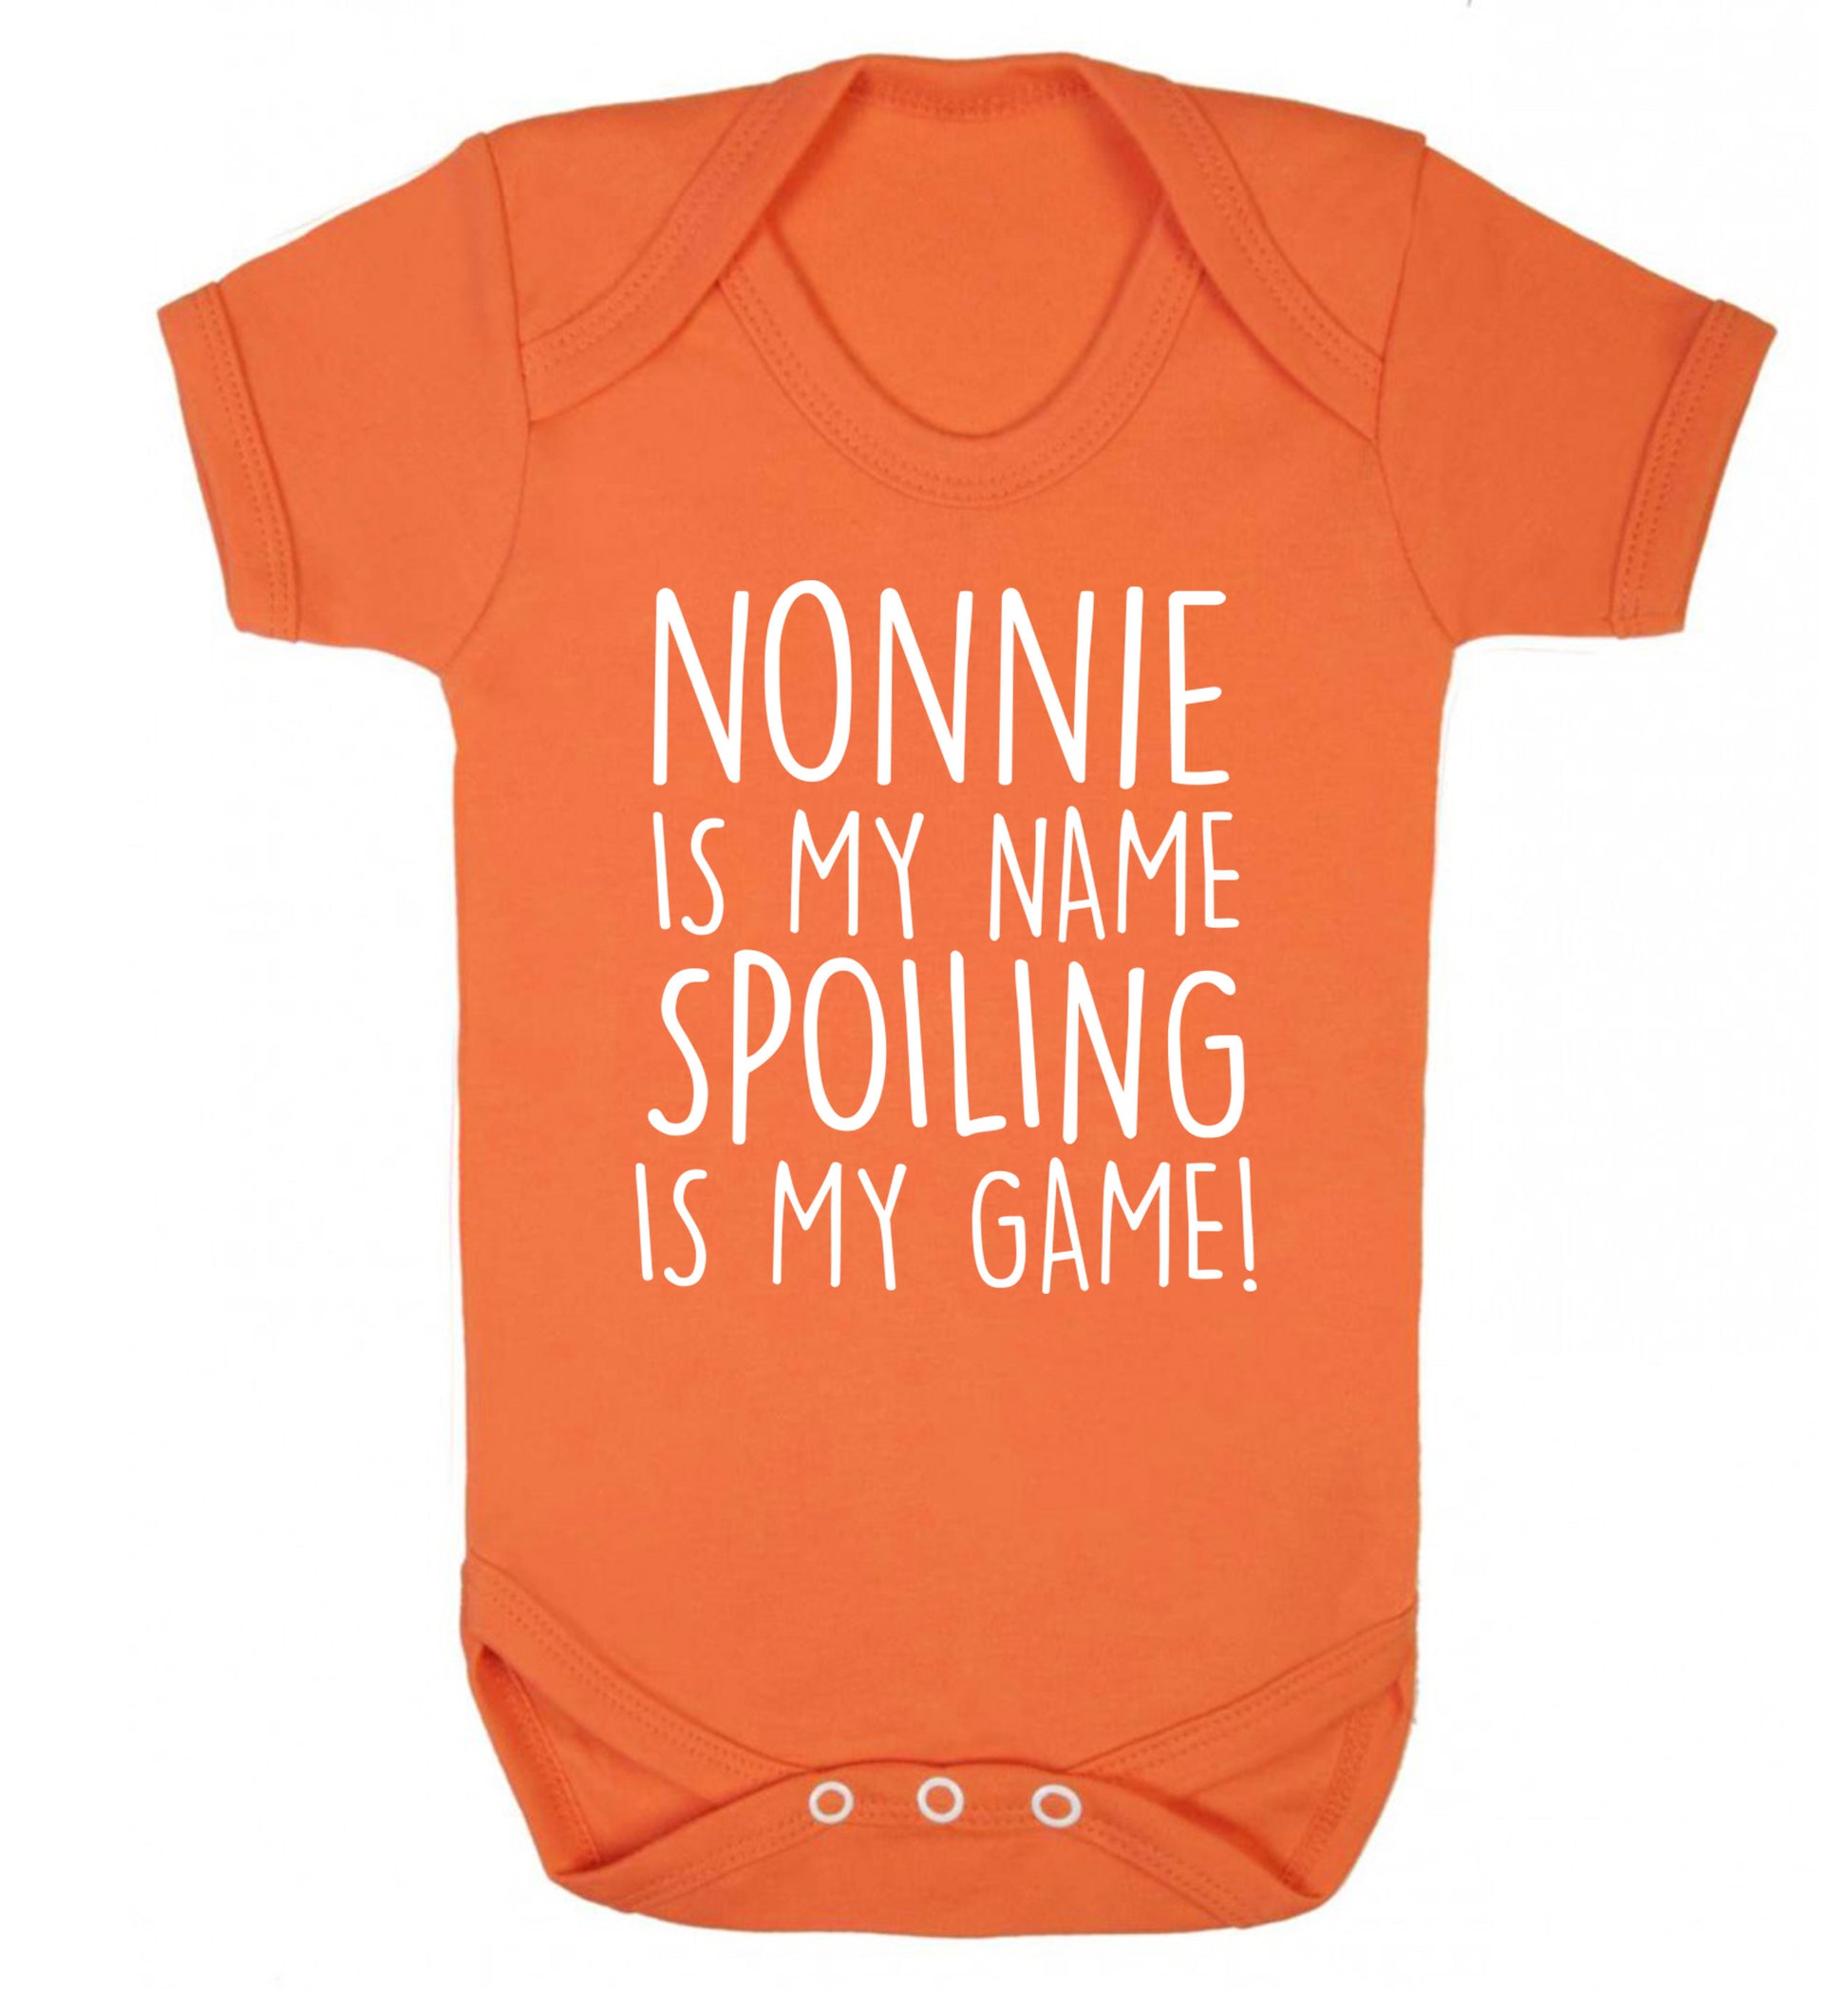 Nonnie is my name, spoiling is my game Baby Vest orange 18-24 months